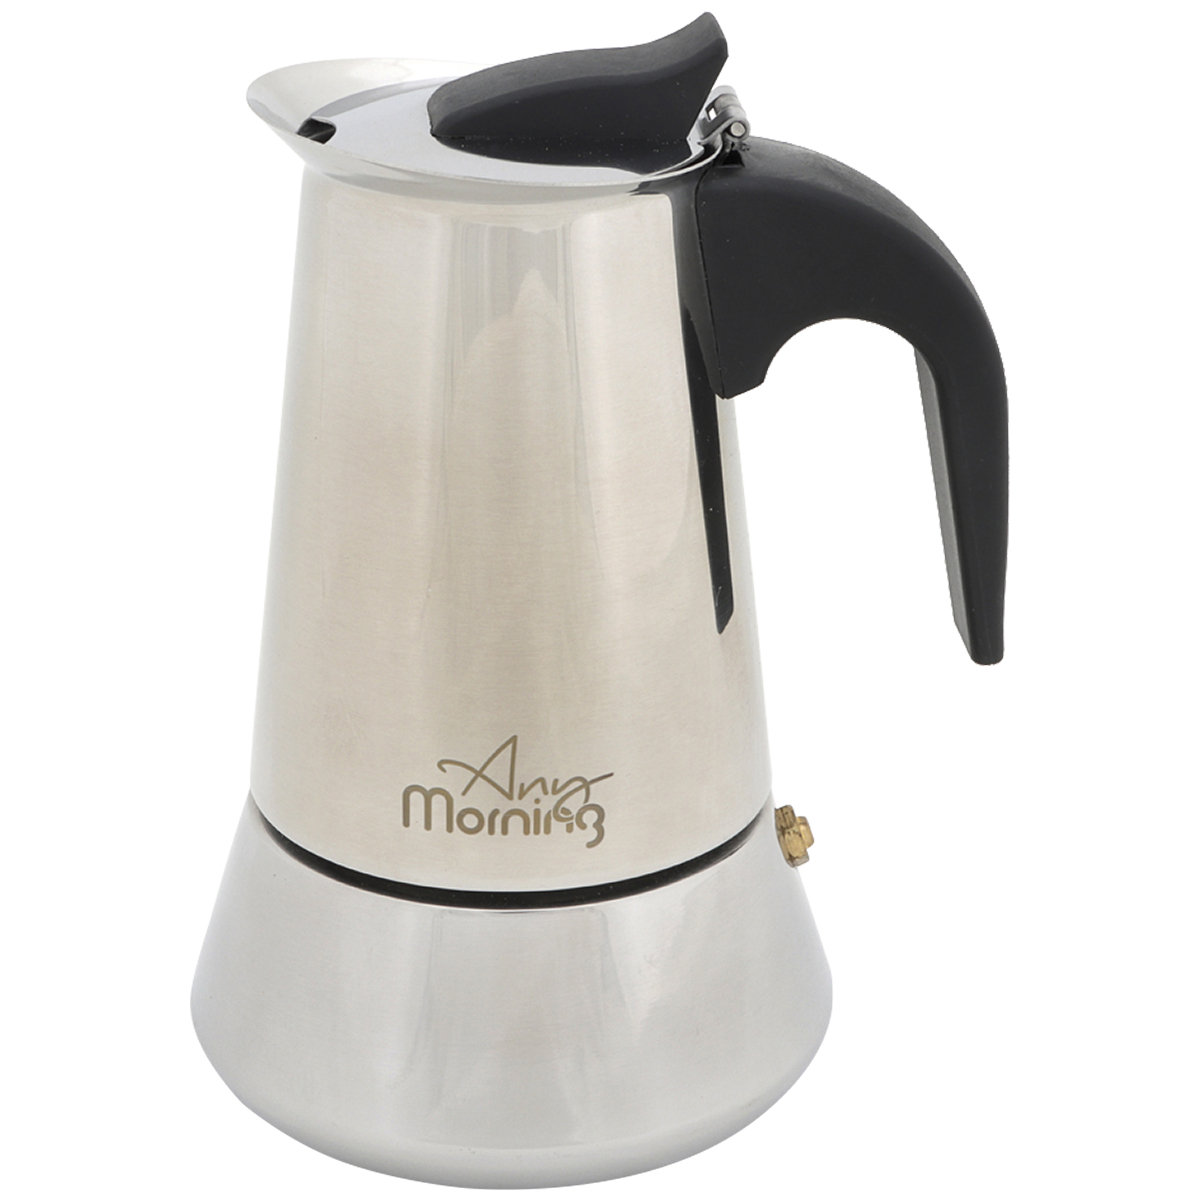 Any morning jun-4 stainless steel espresso coffee maker 200 ml